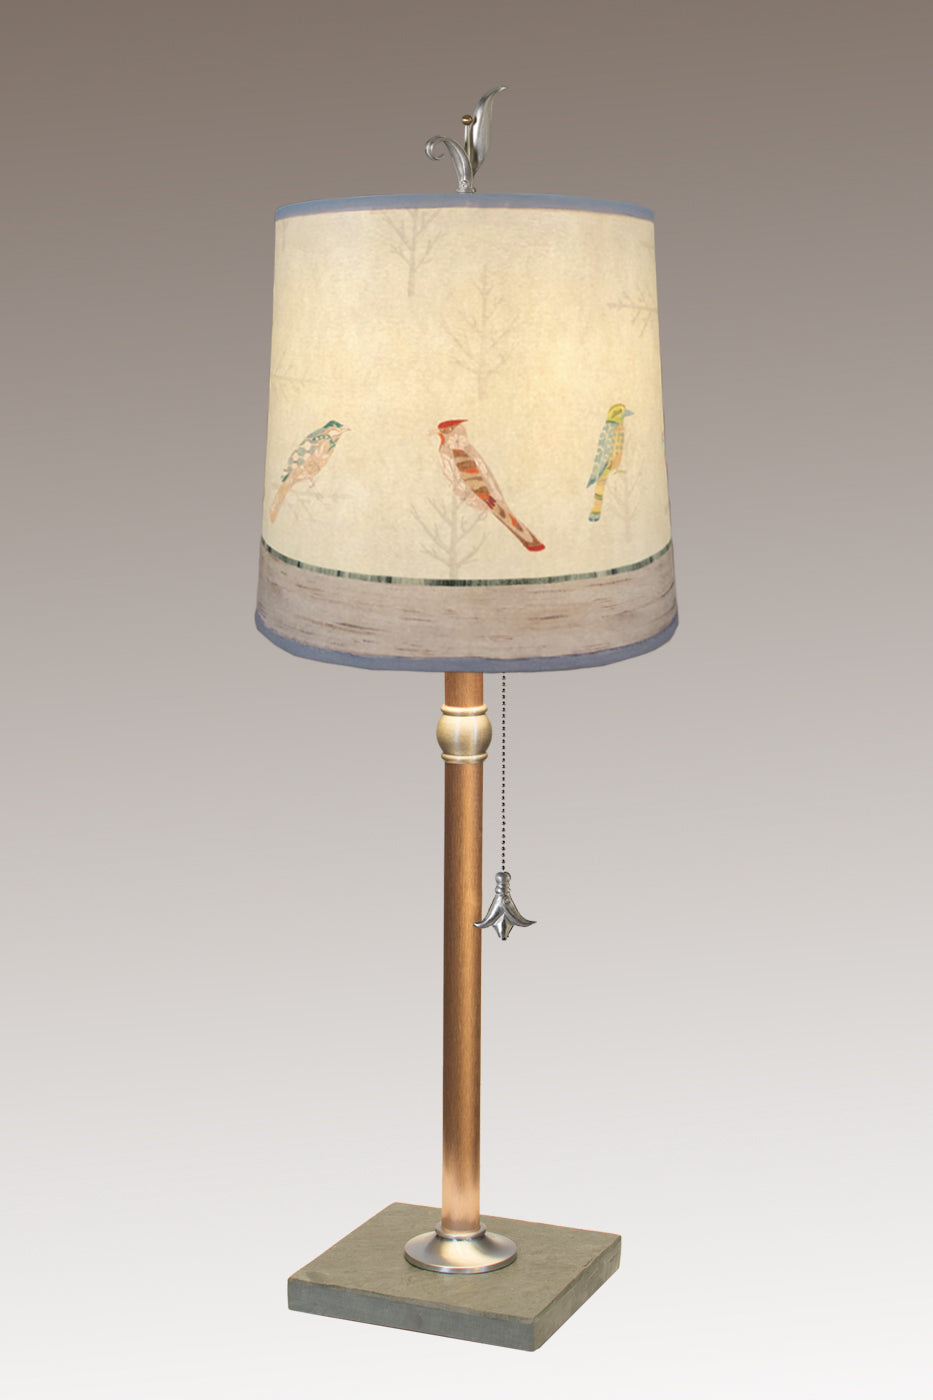 Janna Ugone & Co Table Lamps Copper Table Lamp with Medium Drum Shade in Bird Friends